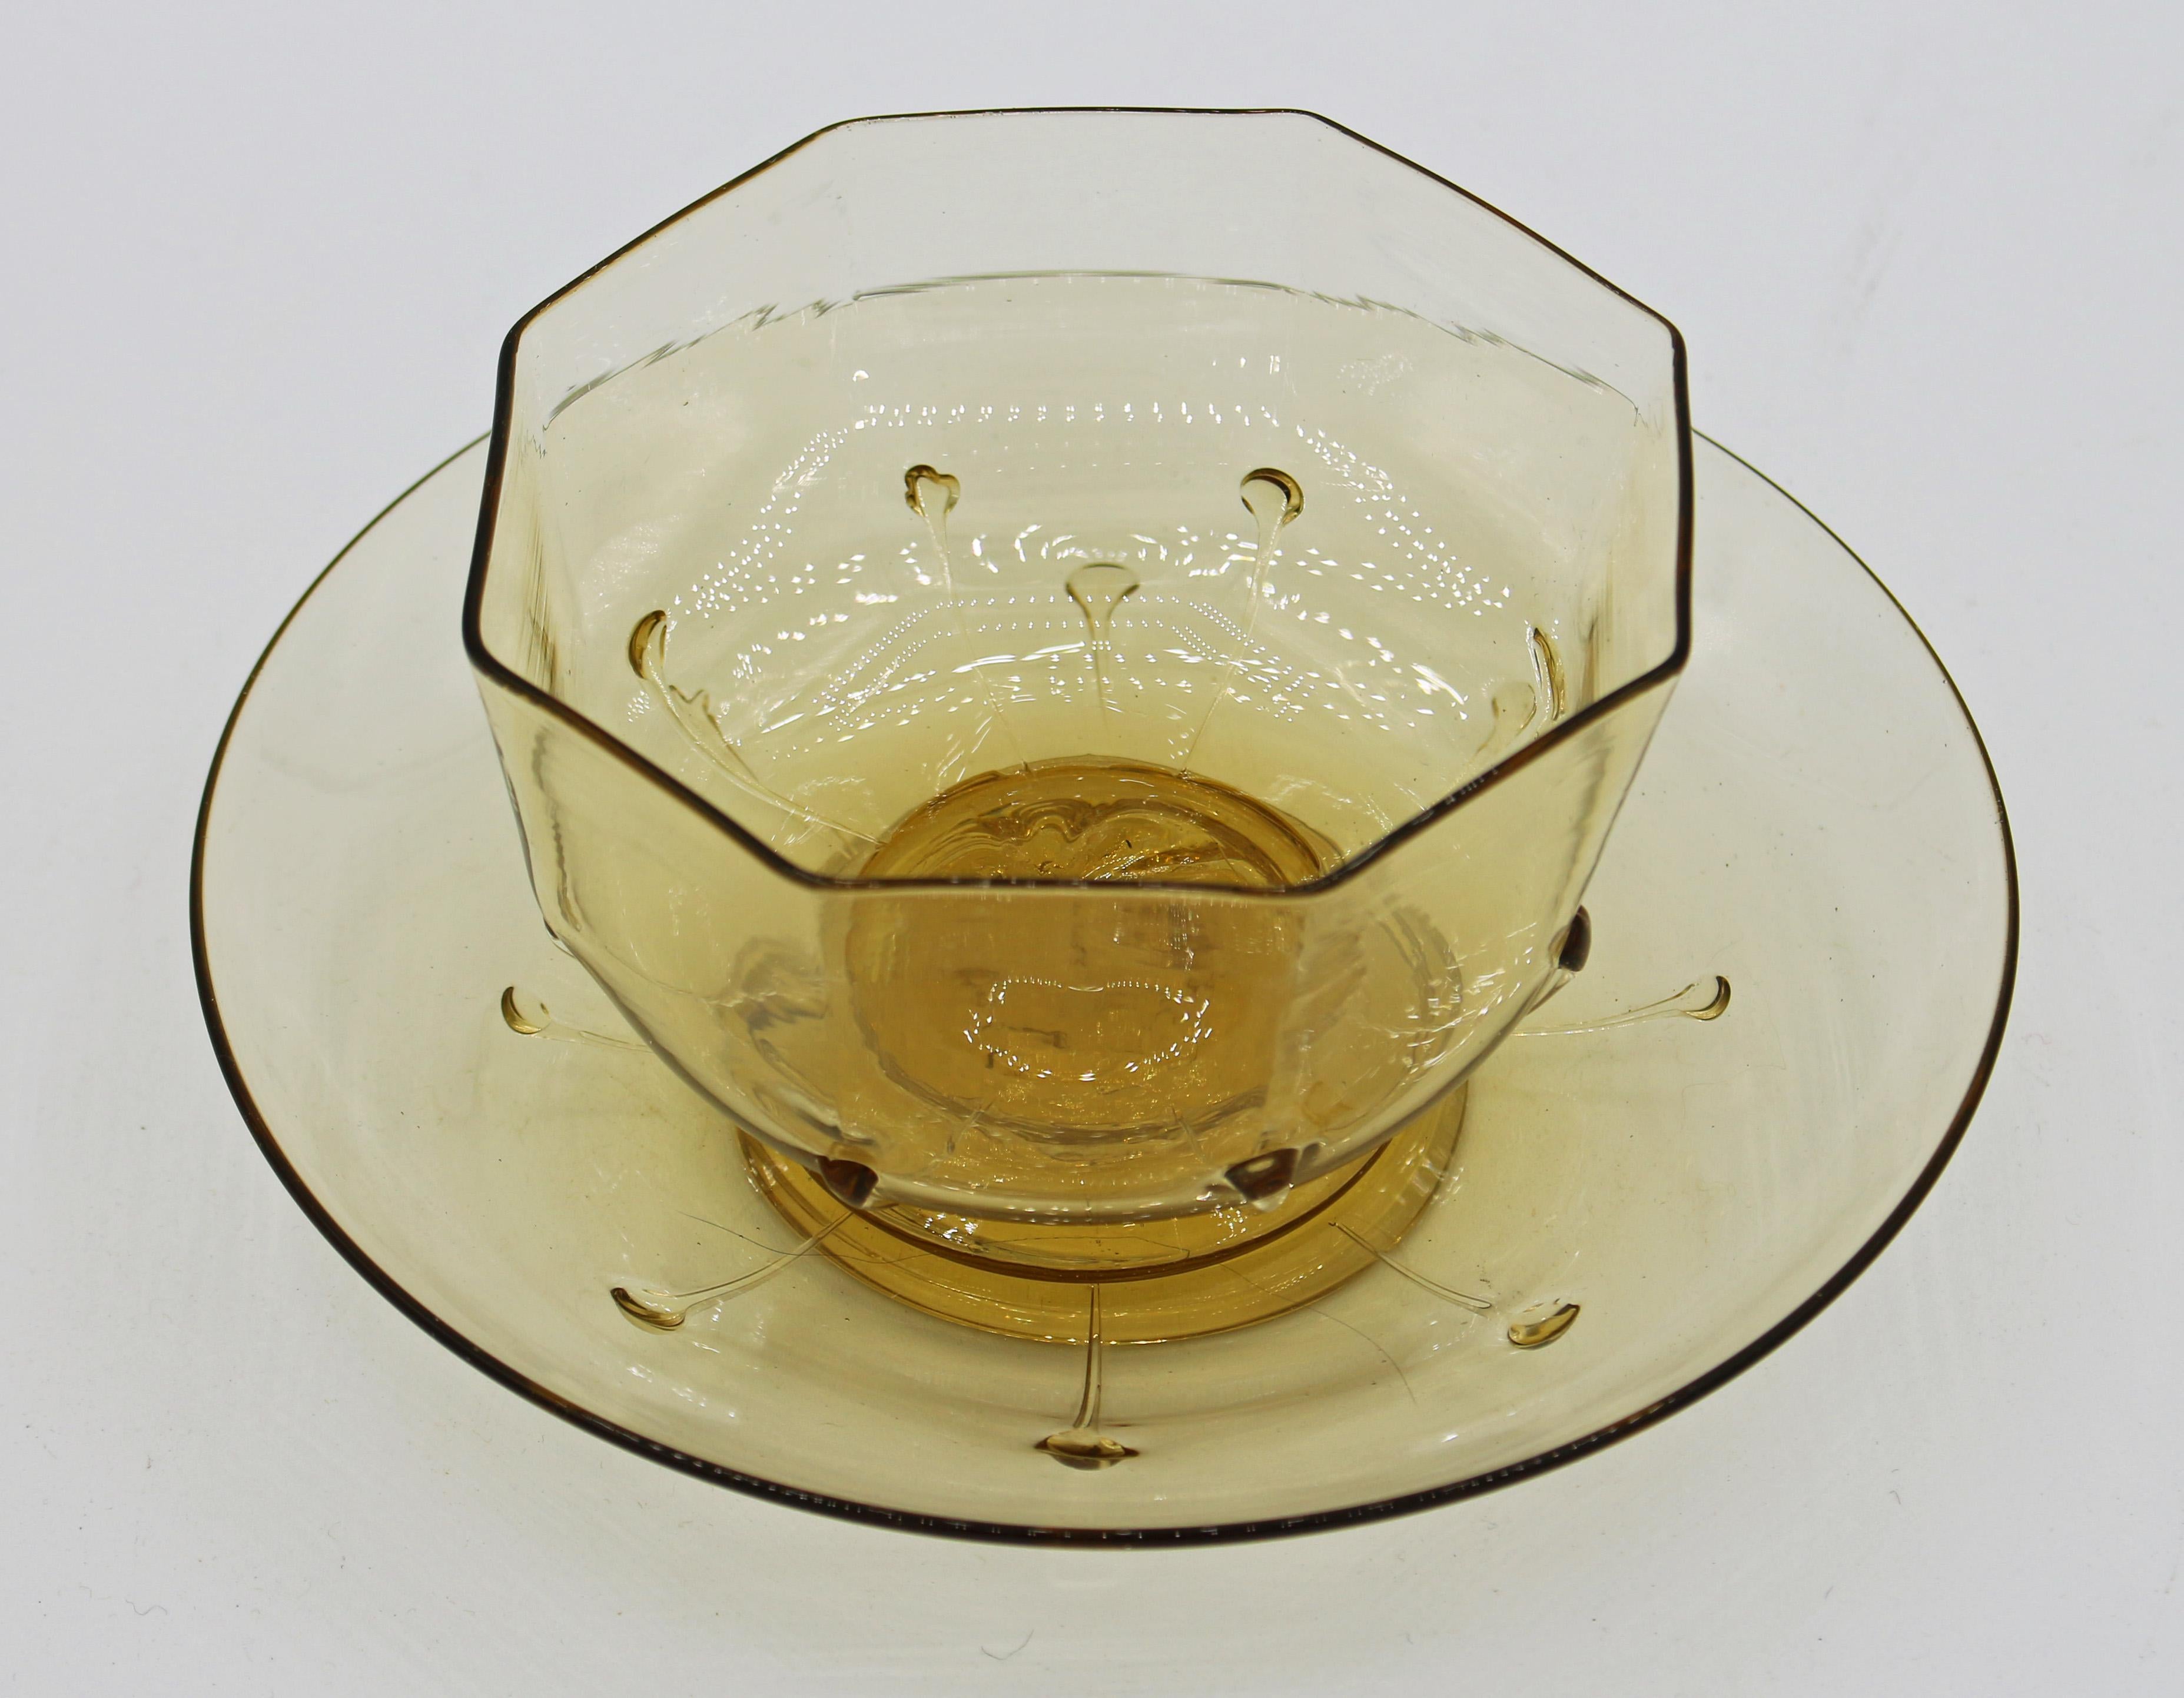 A rare dessert coupe and tray, c. 1925, Murano Salviati Venetian hard blow glass, citrine to light topaz. The octagonal bowl with droplets has a pulled sand dollar or leaf motif above the foot with pontil. Tray has 8 droplets from applied base rim.